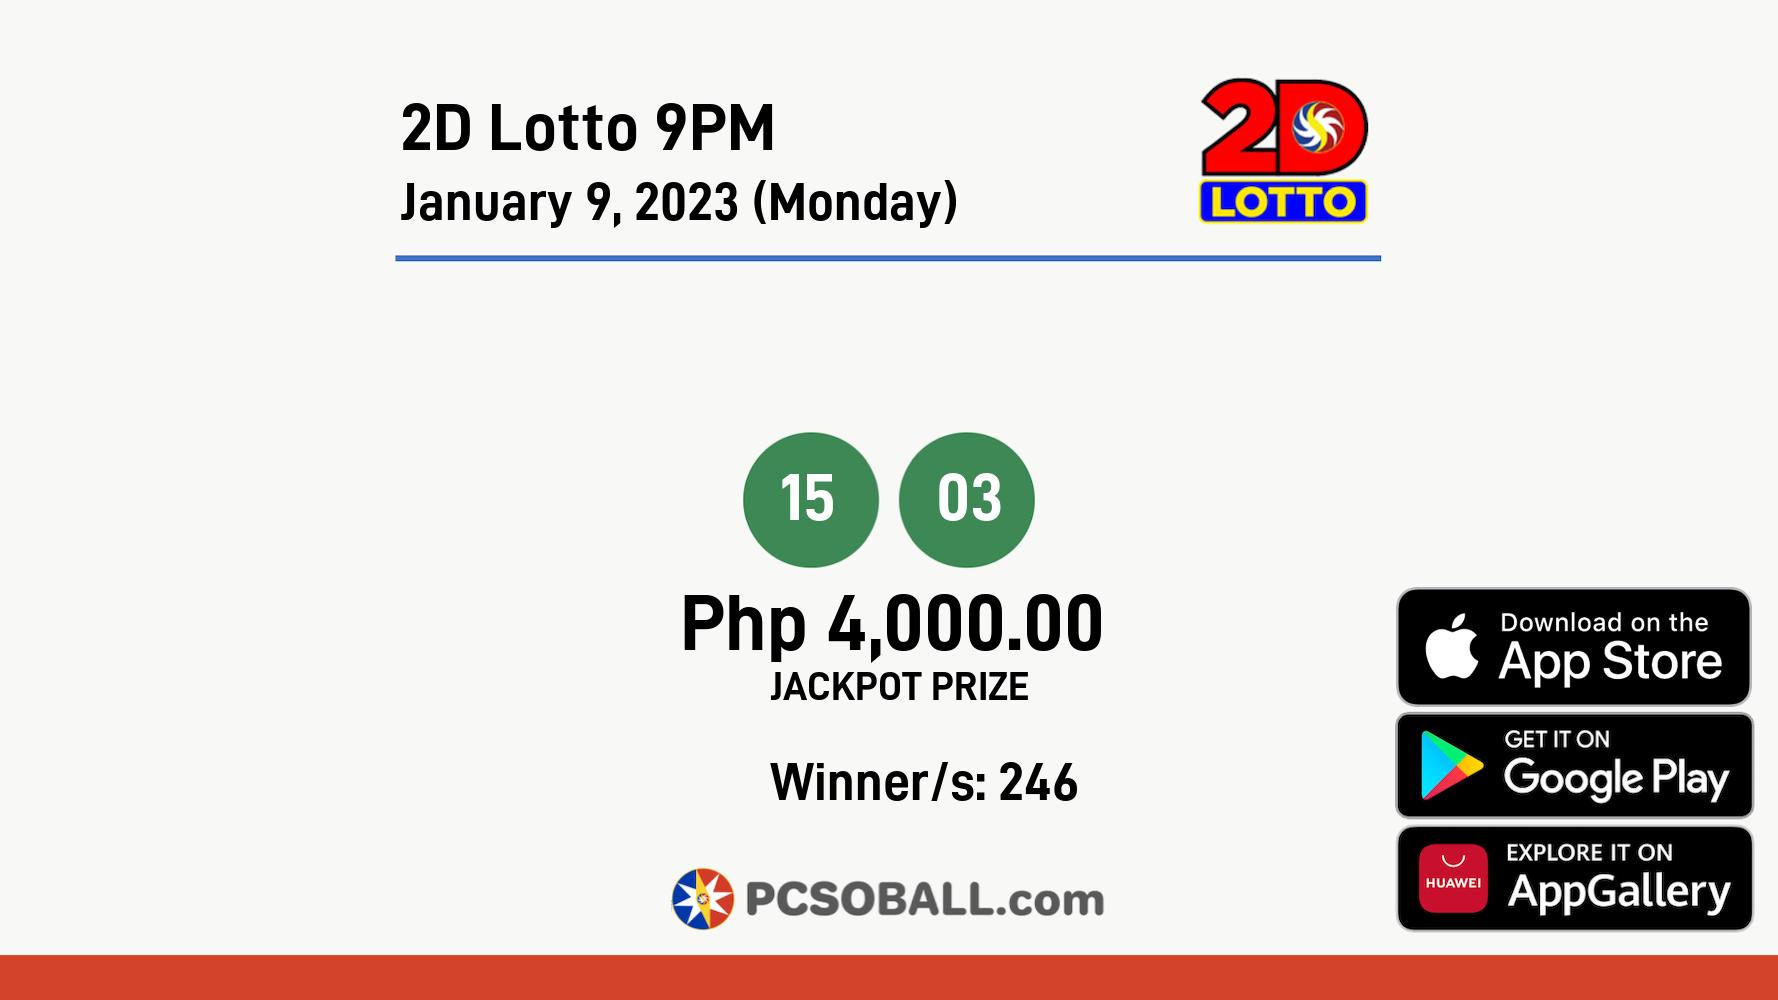 2D Lotto 9PM January 9, 2023 (Monday) Result